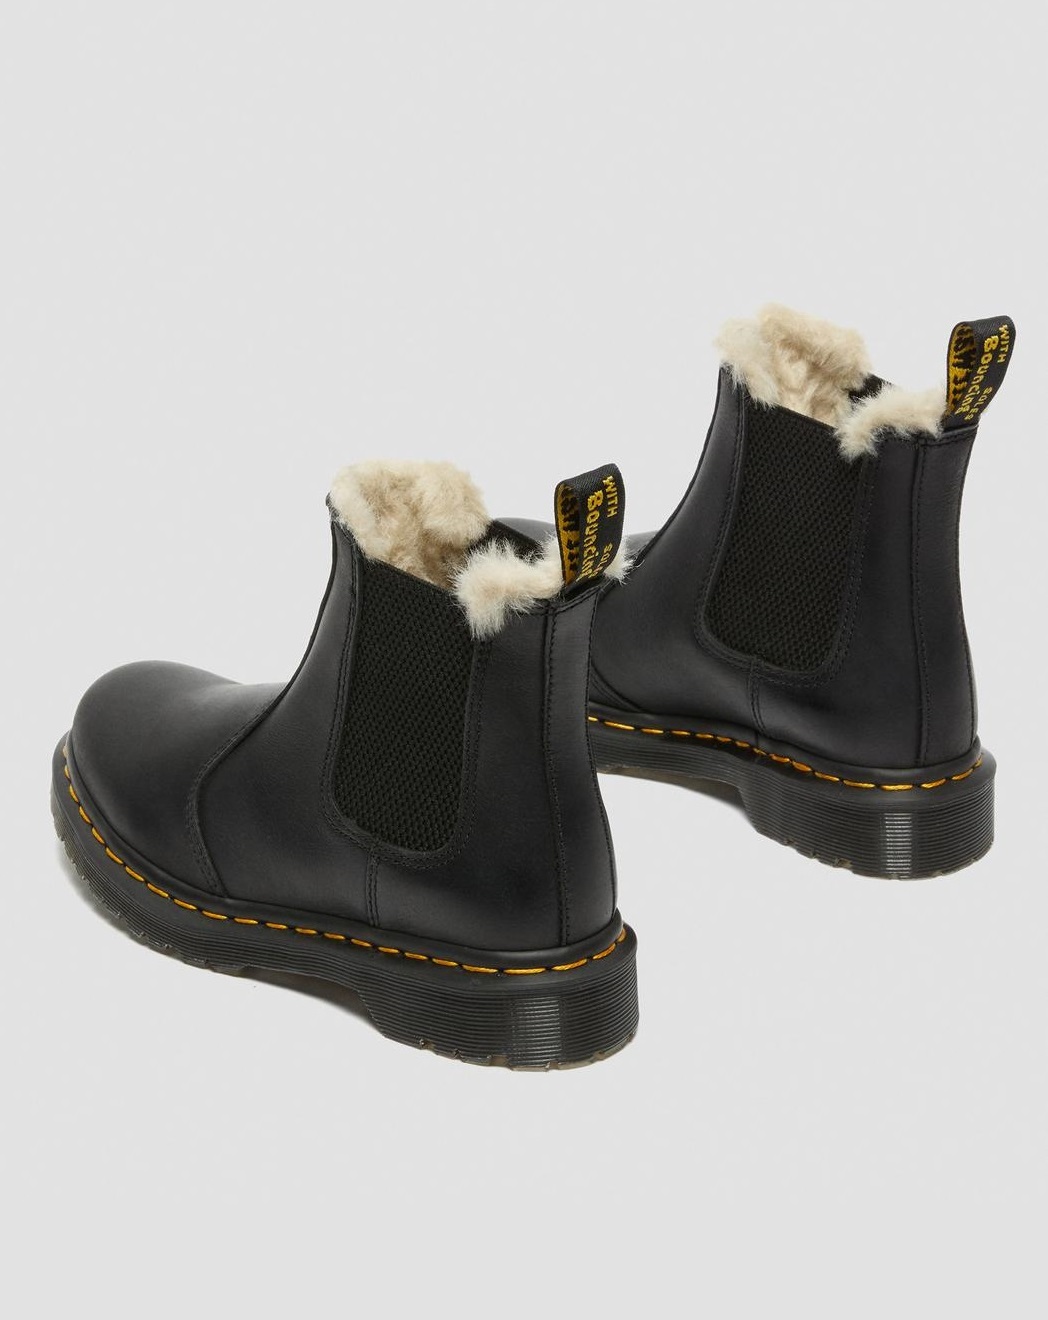 Dr. Martens 2976 Leonore Faux Fur Lined Chelsea Boots Burnished Wyoming Black